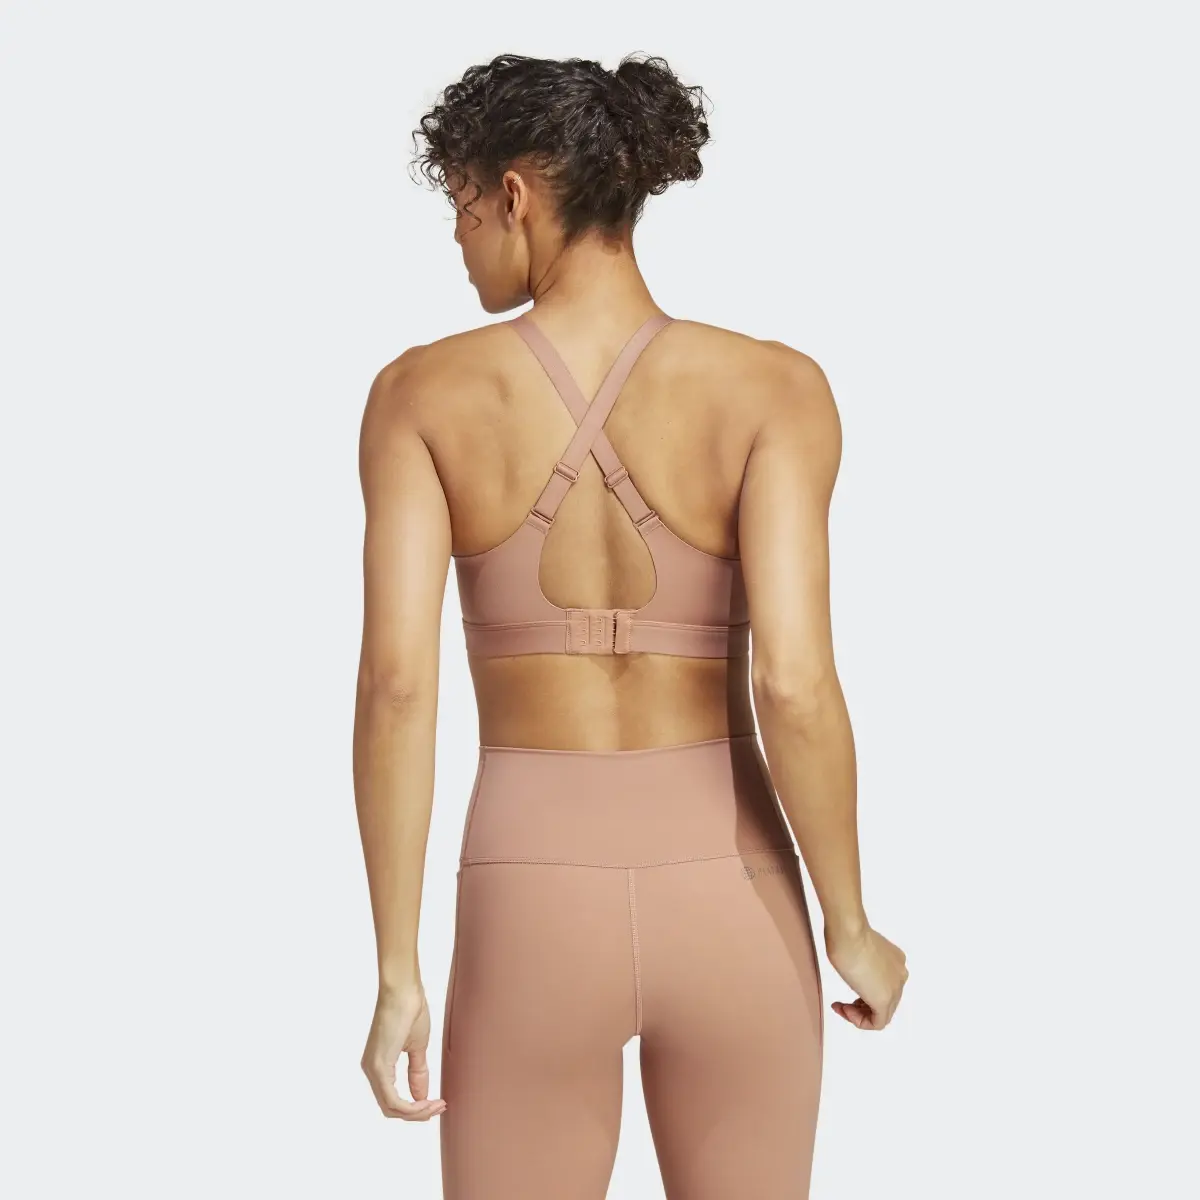 Adidas Brassière Tailored Impact Luxe Training Maintien fort. 3